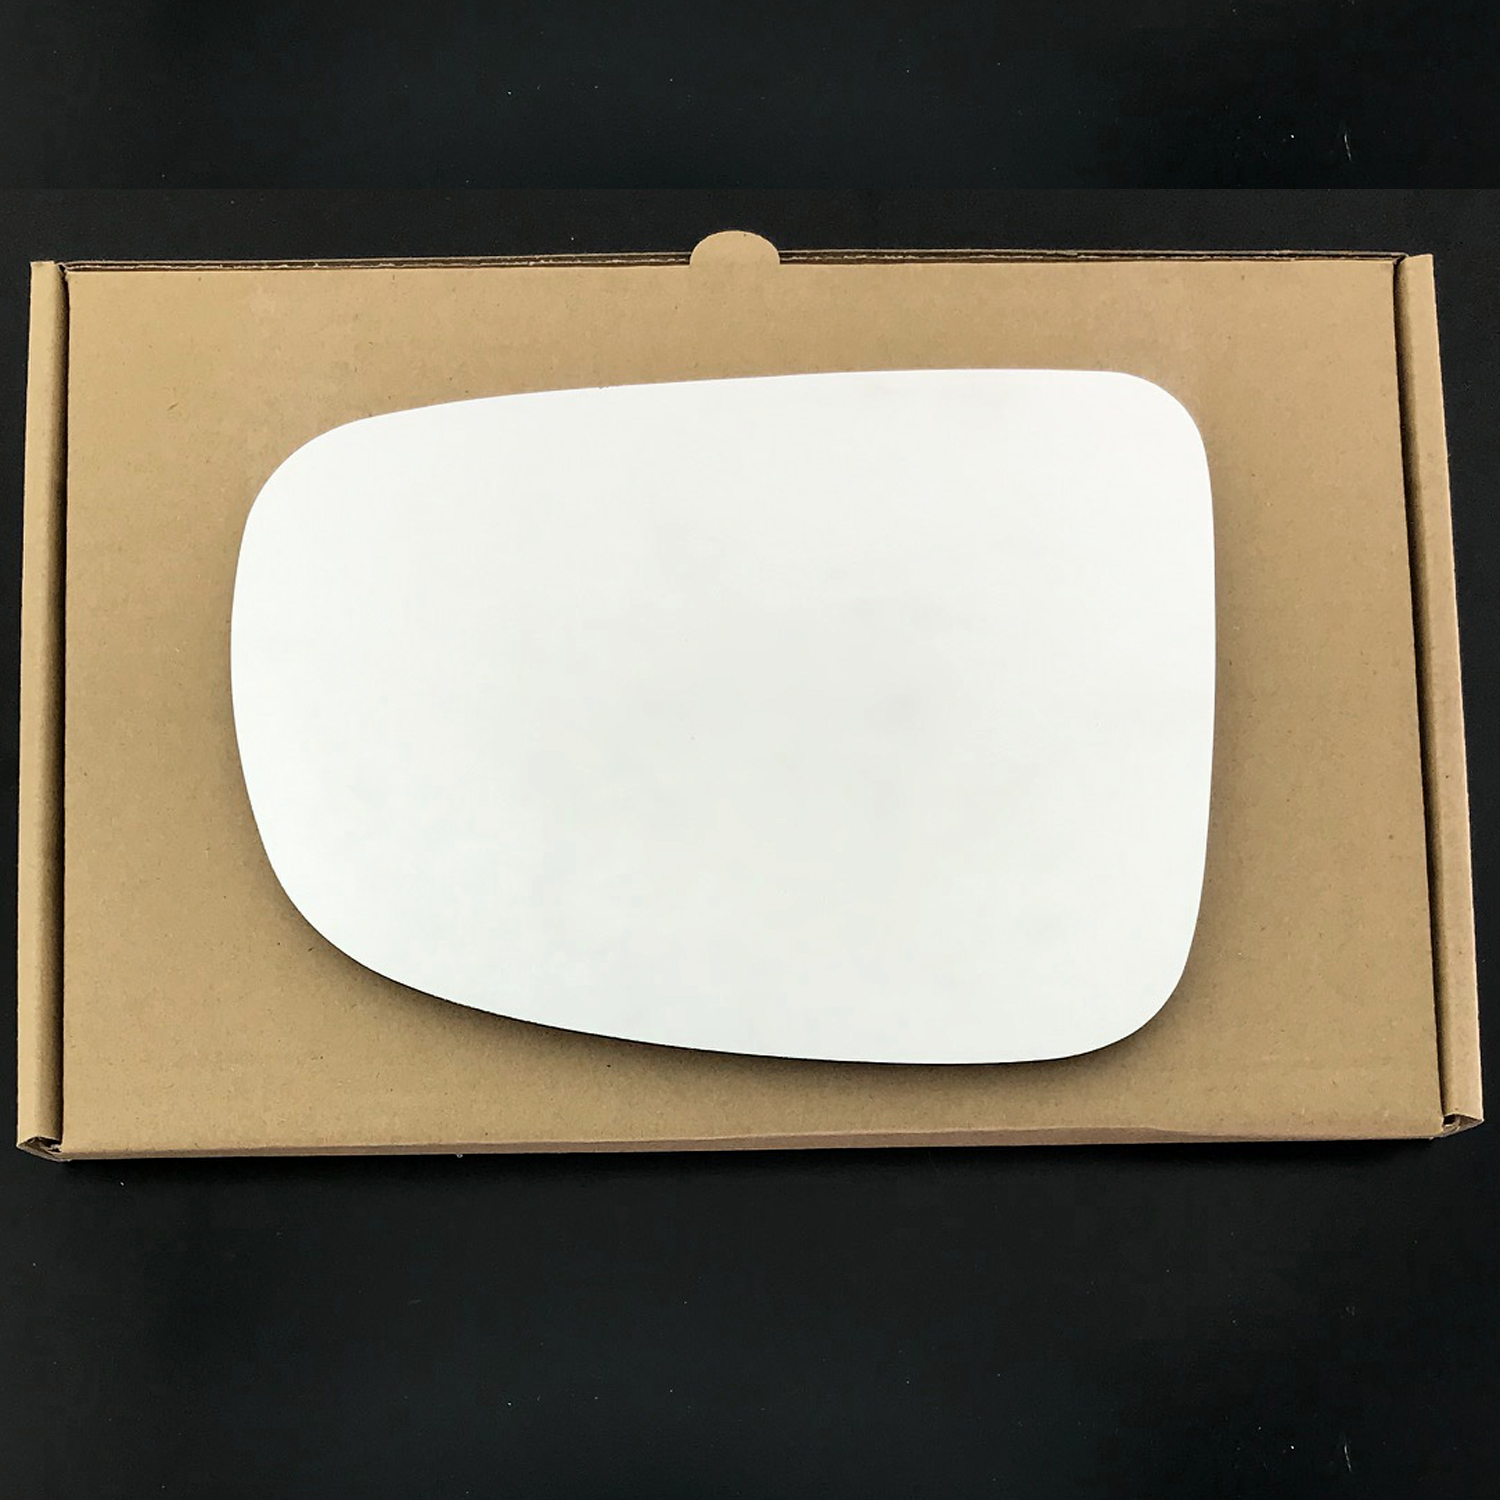 Ford Transit Wing Mirror Glass LEFT HAND ( UK Passenger Side ) 1994 to 1999 – Convex Wing Mirror ( Electric mirror )